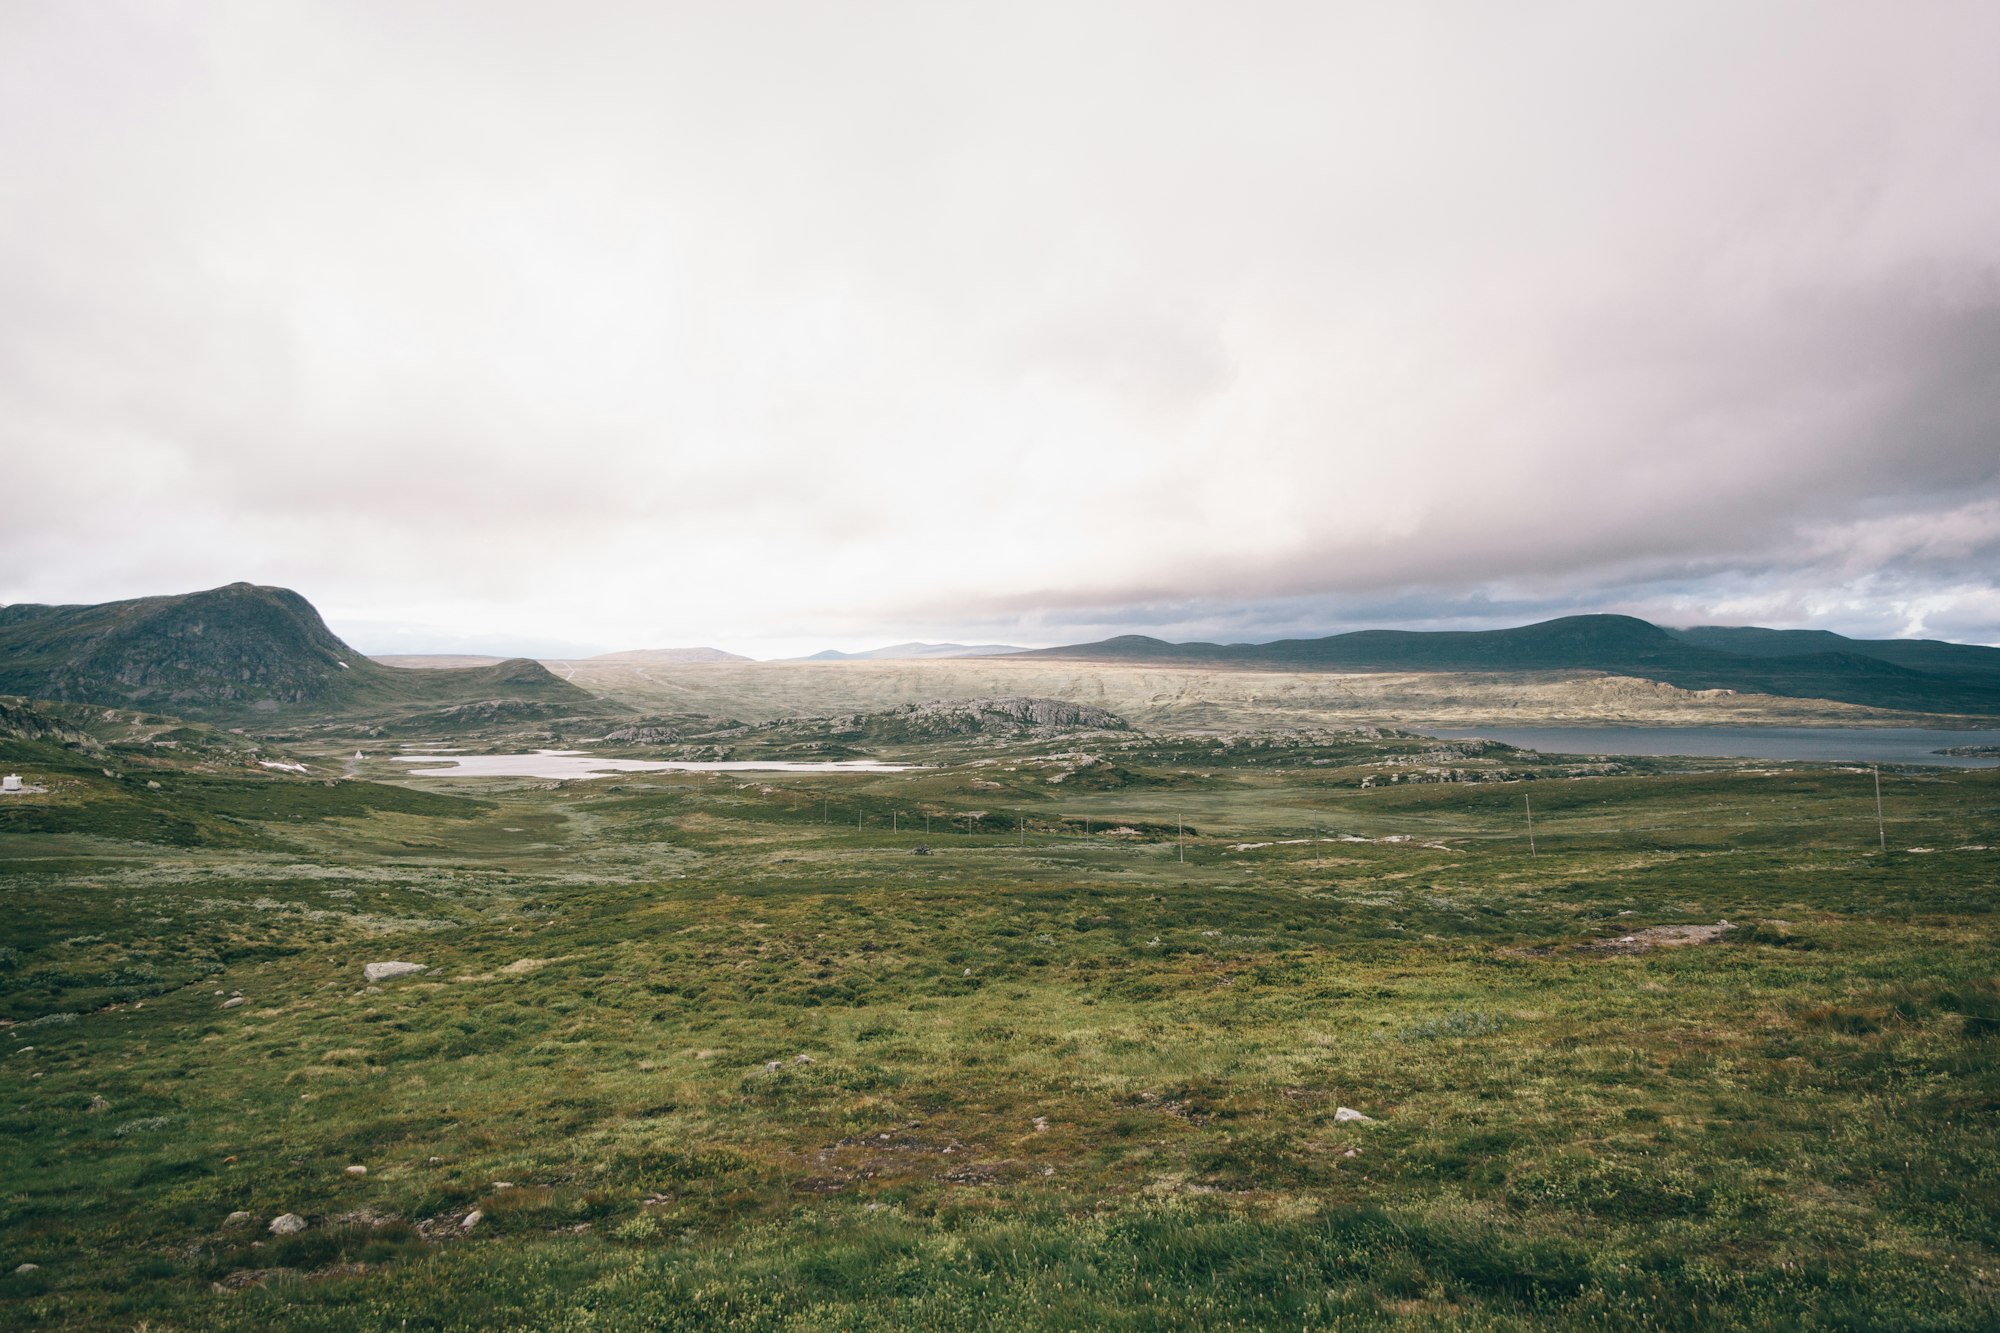 Rain clouds coming in over the Valdresflya mountain plateau in Jotunheimen, Norway.